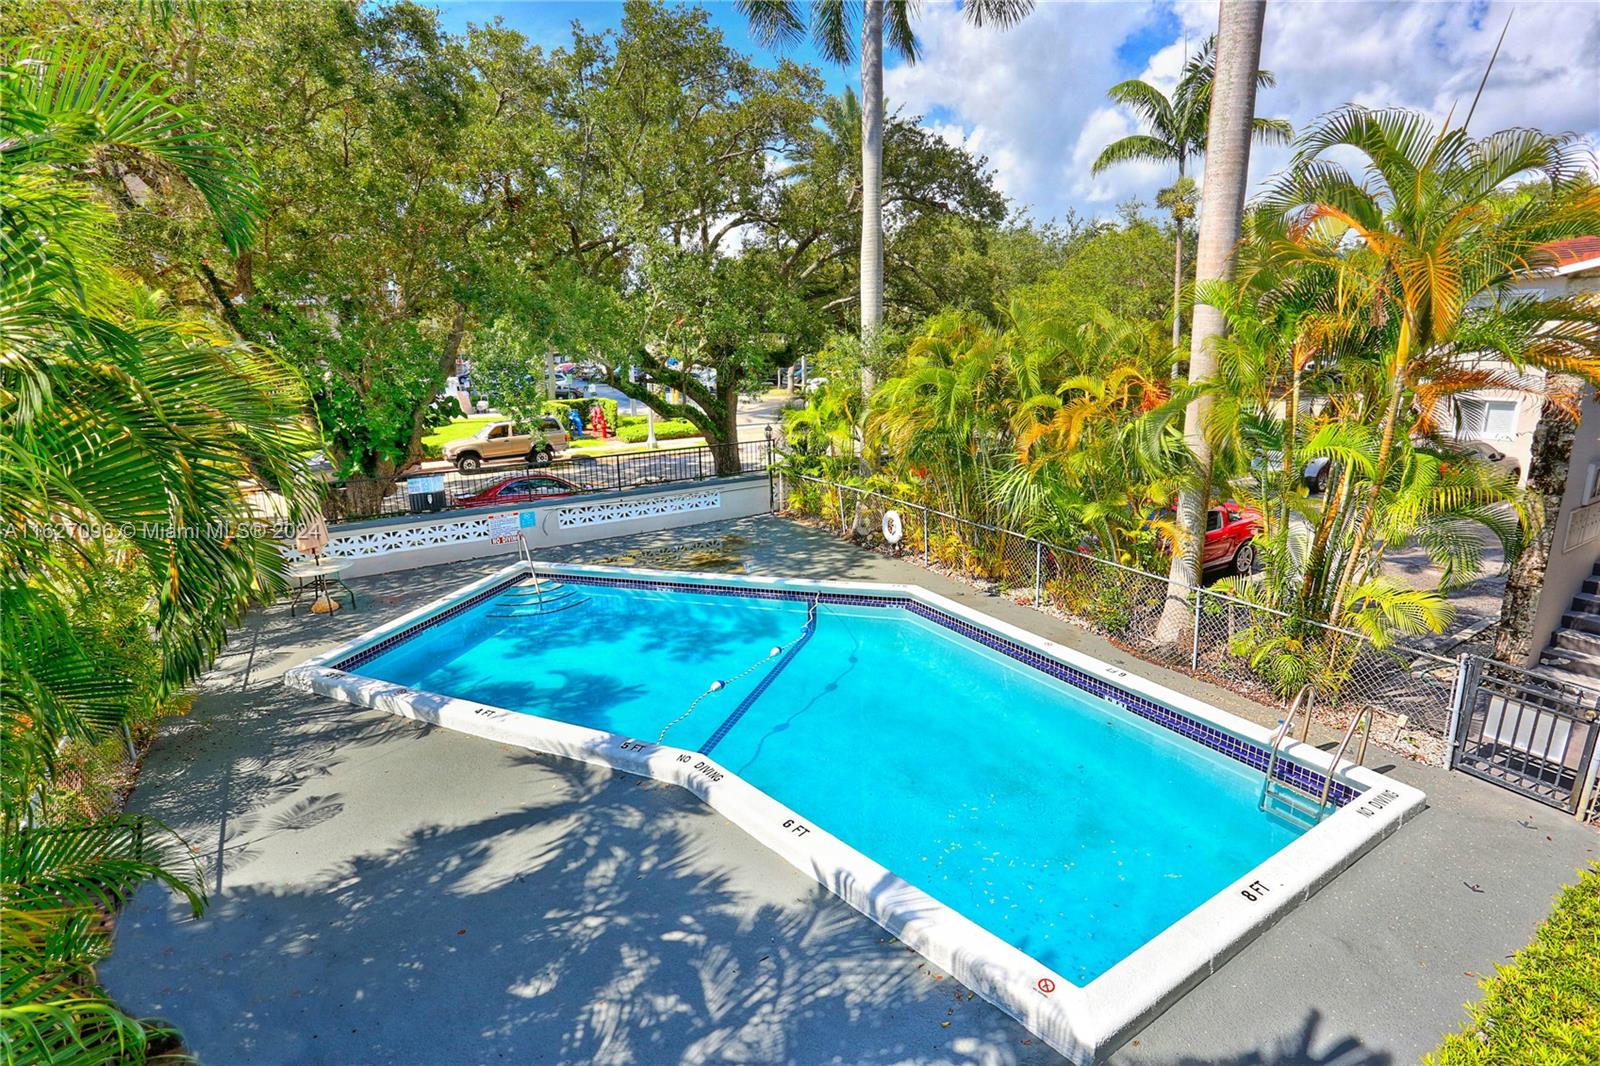 Wonderfully updated 2bdrm/1bath condo on coveted Edgewater Drive. Lovely details include dark wood flooring, crown moldings, and baseboards throughout. Open living/dining areas, kitchen with stainless steel appliances and modern bathroom. 1 parking space. Close proximity to the Grove and South Miami areas.